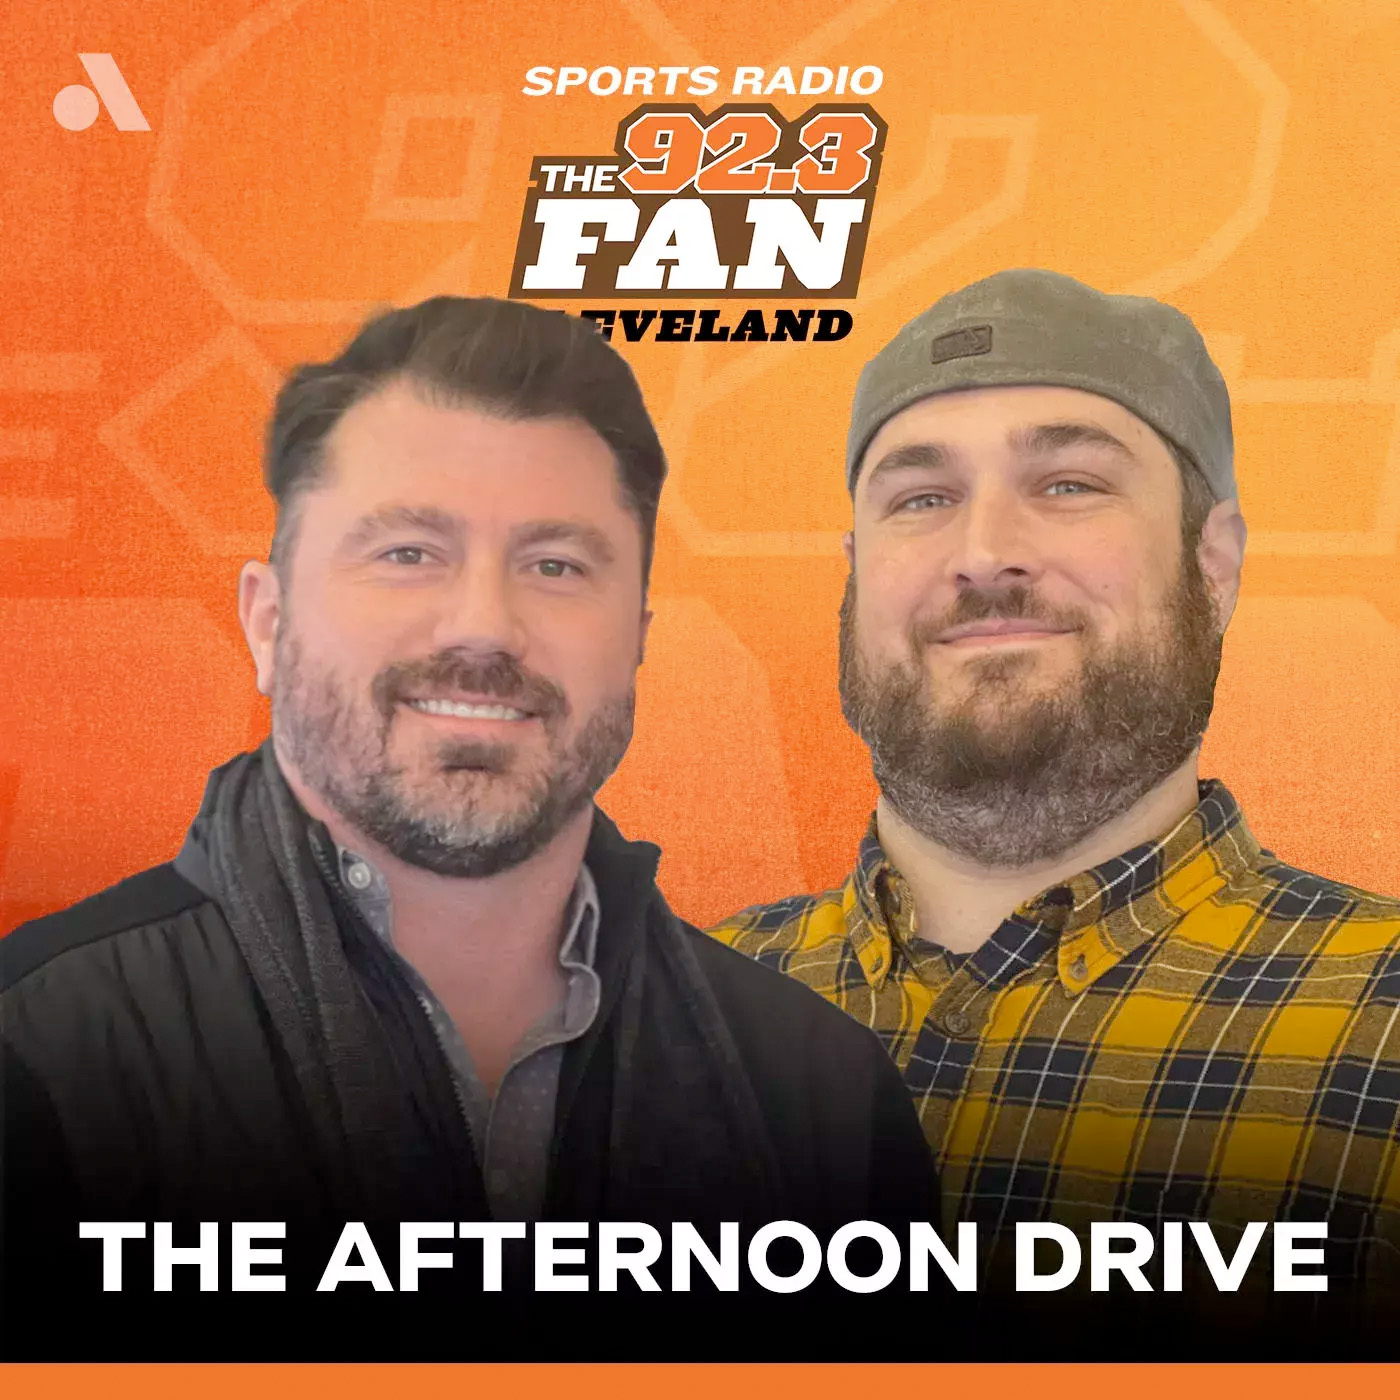 Bull & Fox talk about Chris Mortensen's comments that the Browns want an adult at QB